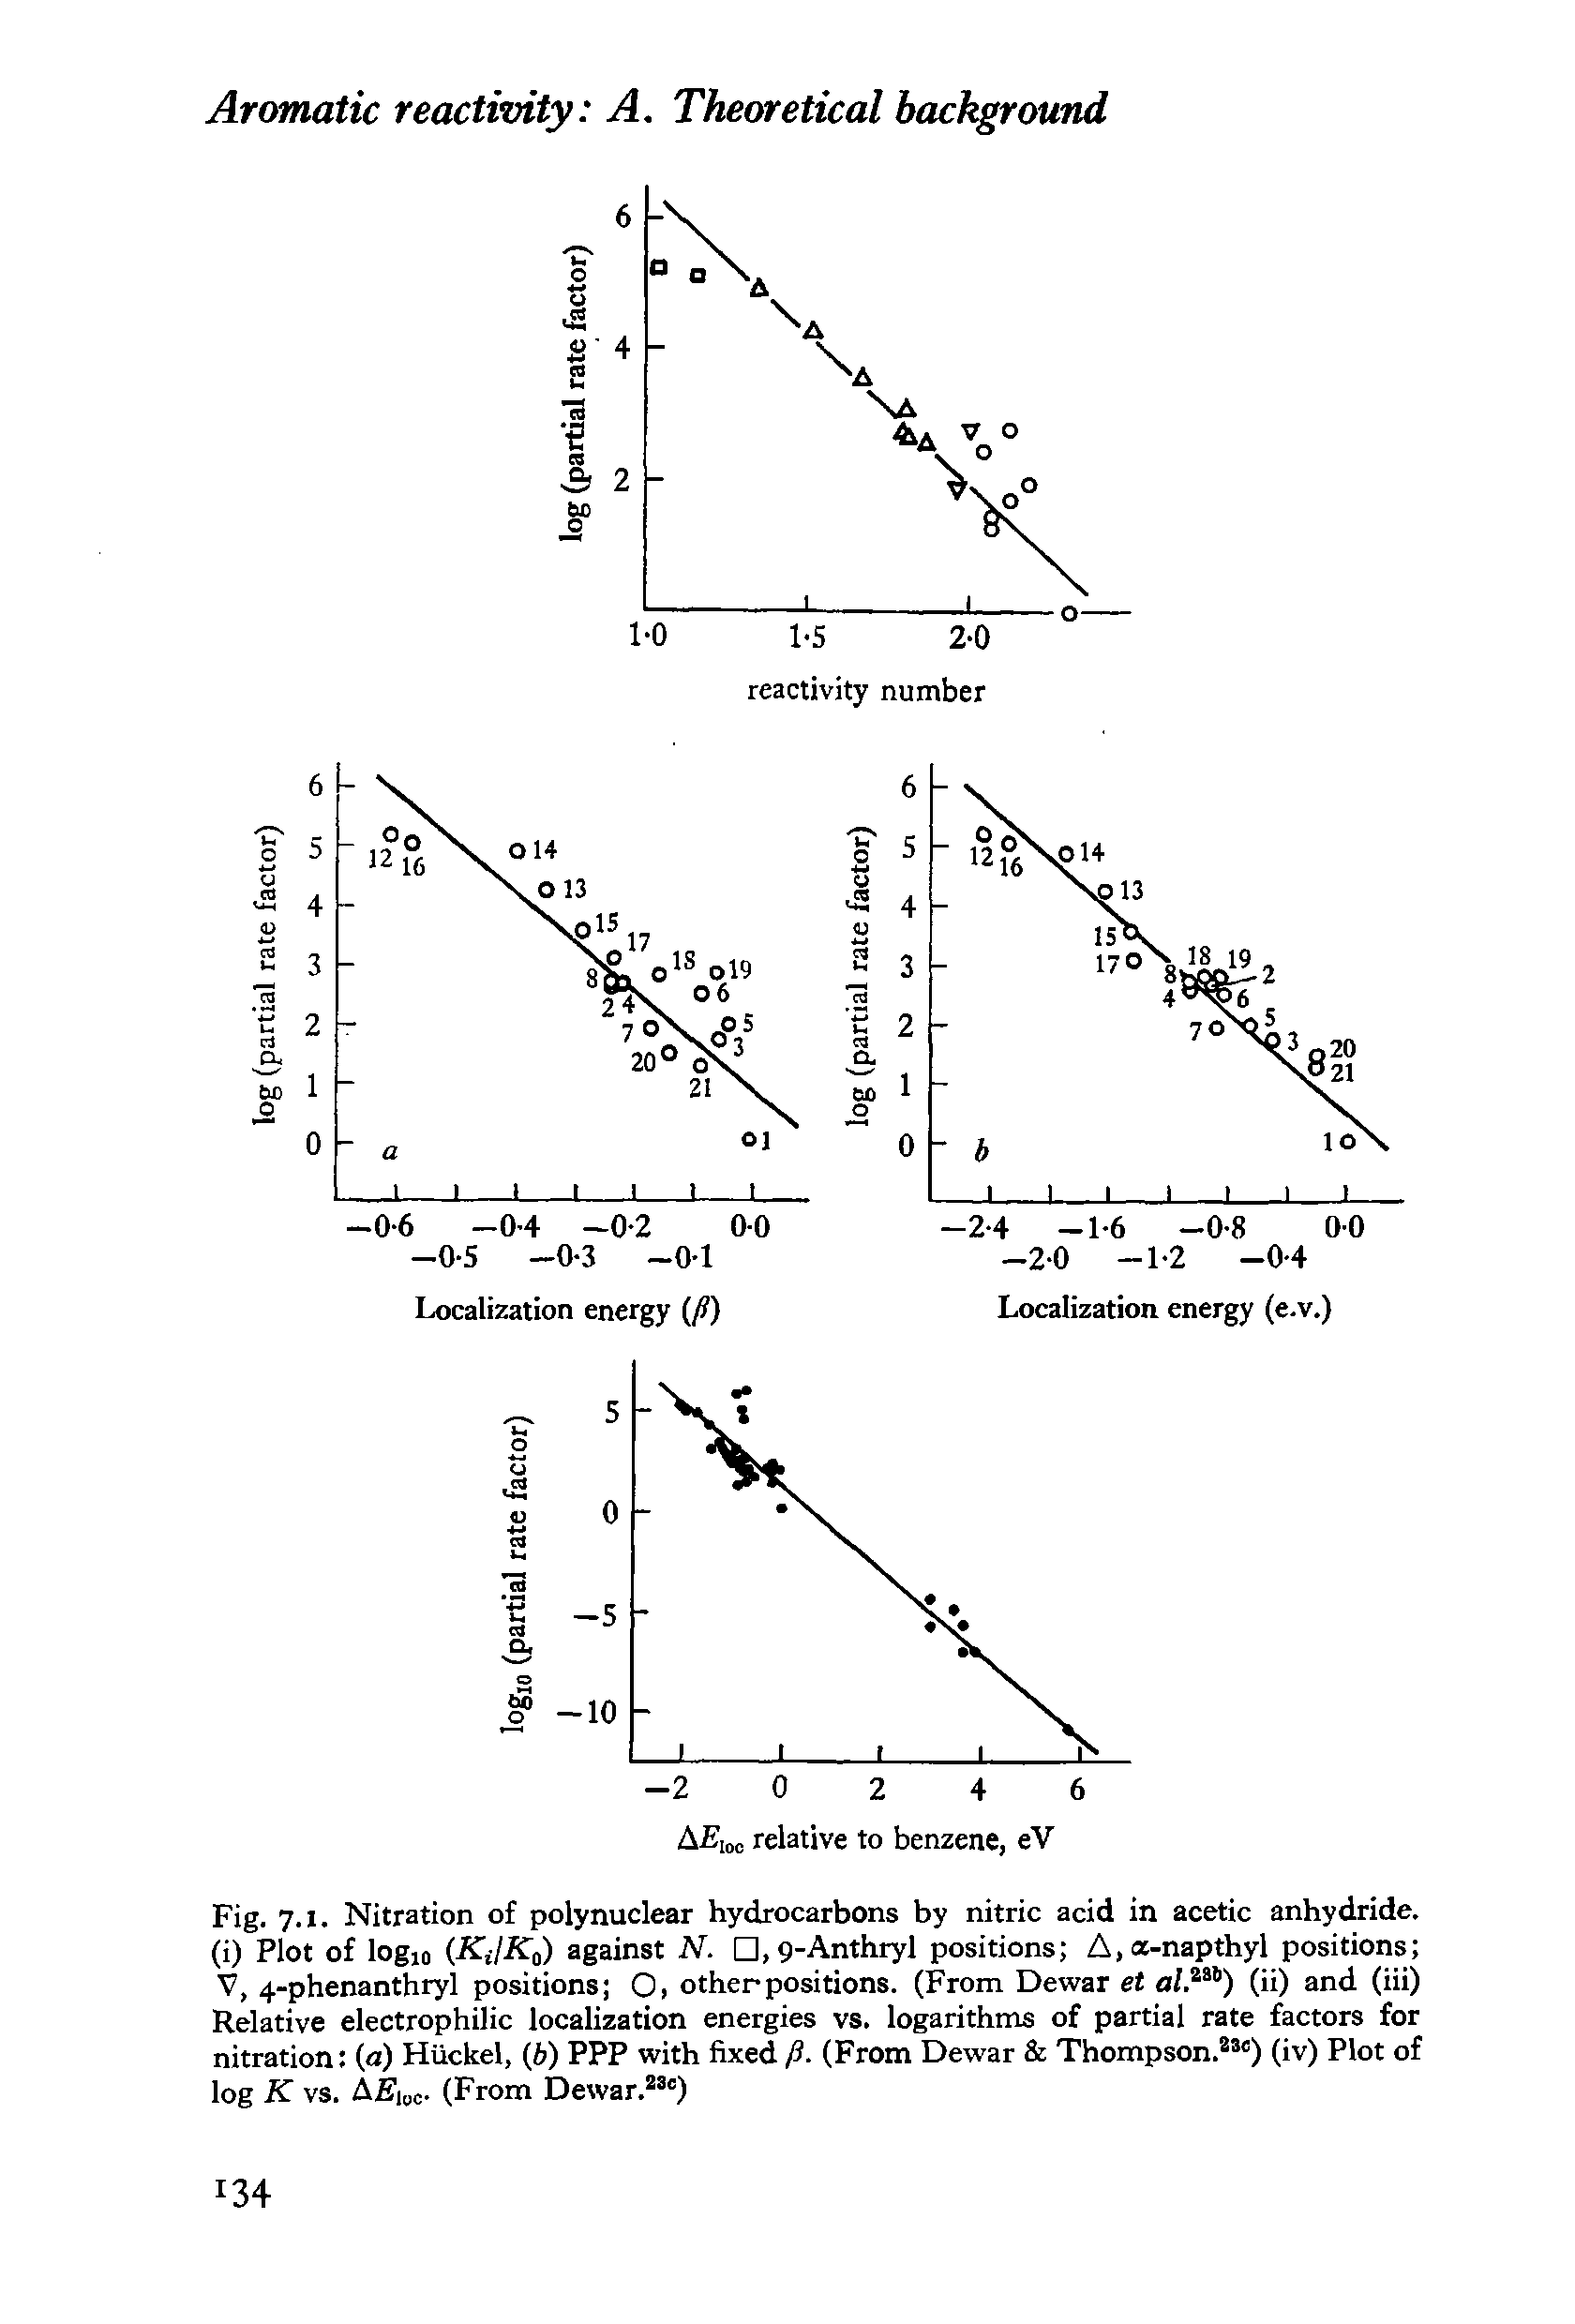 Fig. 7.1. Nitration of polynuclear hydrocarbons by nitric acid in acetic anhydride, (i) Plot of logio (KJKo) against N. , 9-Anthryl positions A,a-napthyl positions V, 4-phenanthryi positions O, other positions. (From Dewar et a/.286) (ii) and (iii) Relative electrophilic localization energies vs. logarithms of partial rate factors for nitration (a) Hiickel, (6) PPP with fixed p. (From Dewar Thompson.83 ) (iv) Plot of log K vs. AEiac- (From Dewar.23 )...